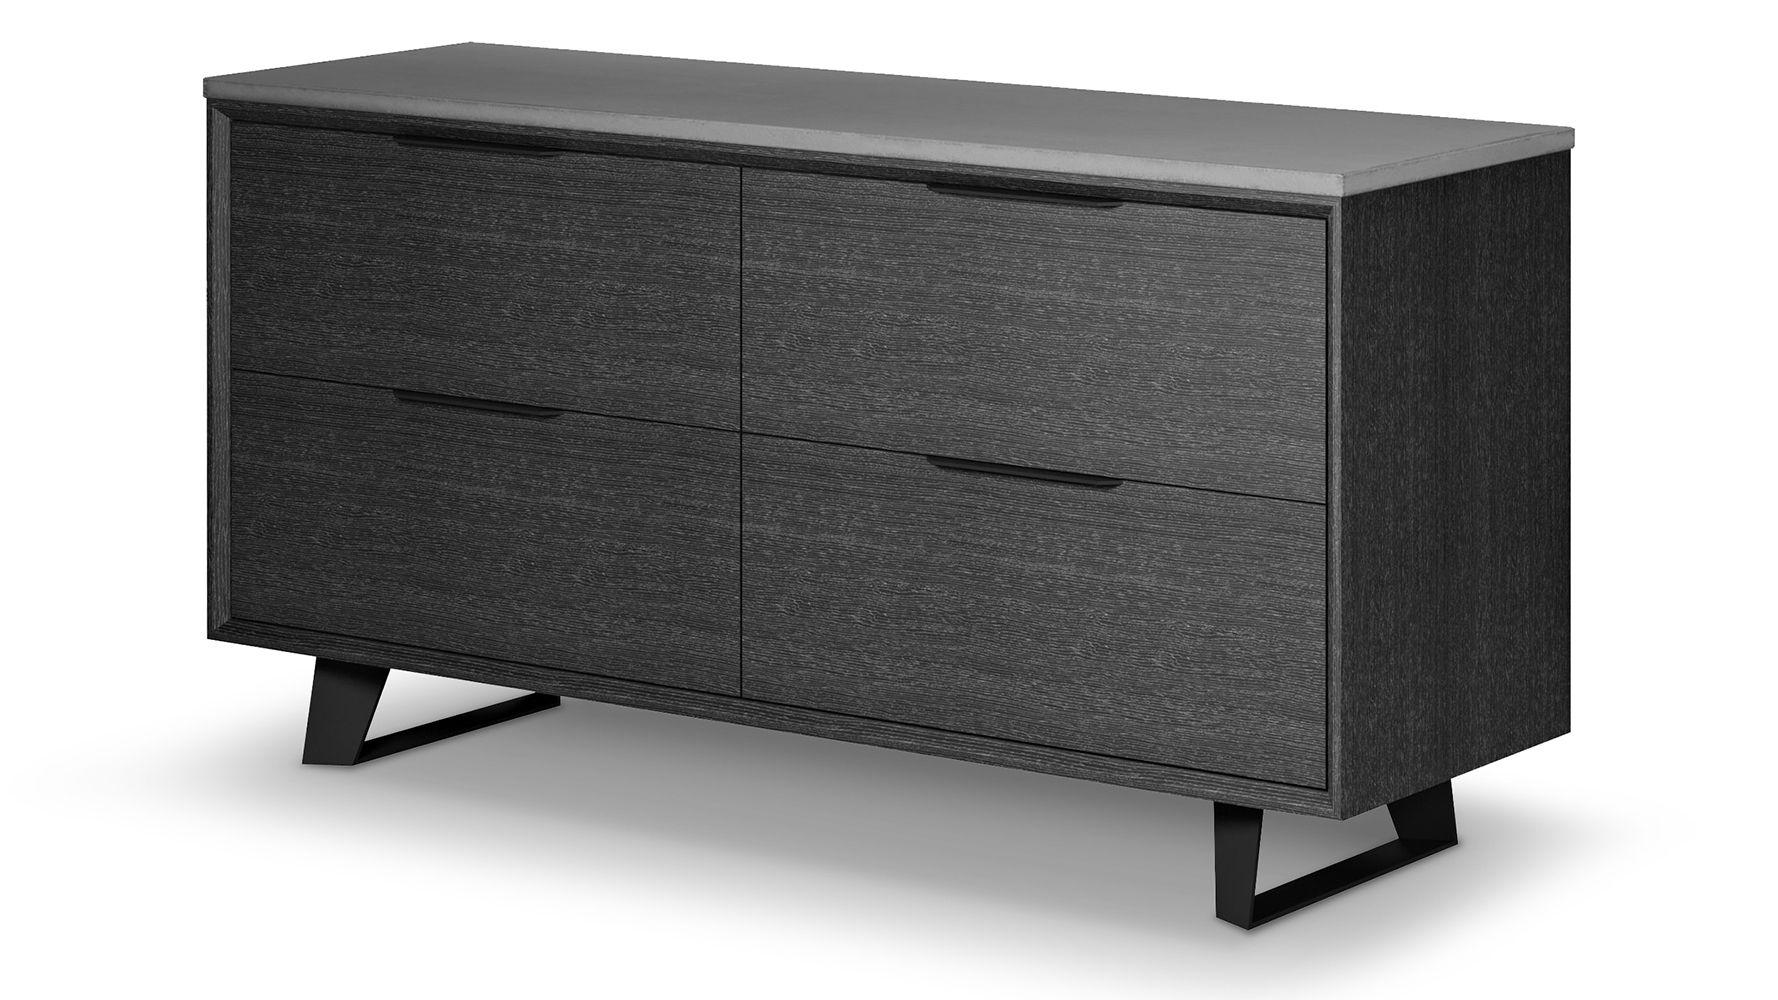 Adal File Credenza Throughout Bright Angles Credenzas (View 26 of 30)